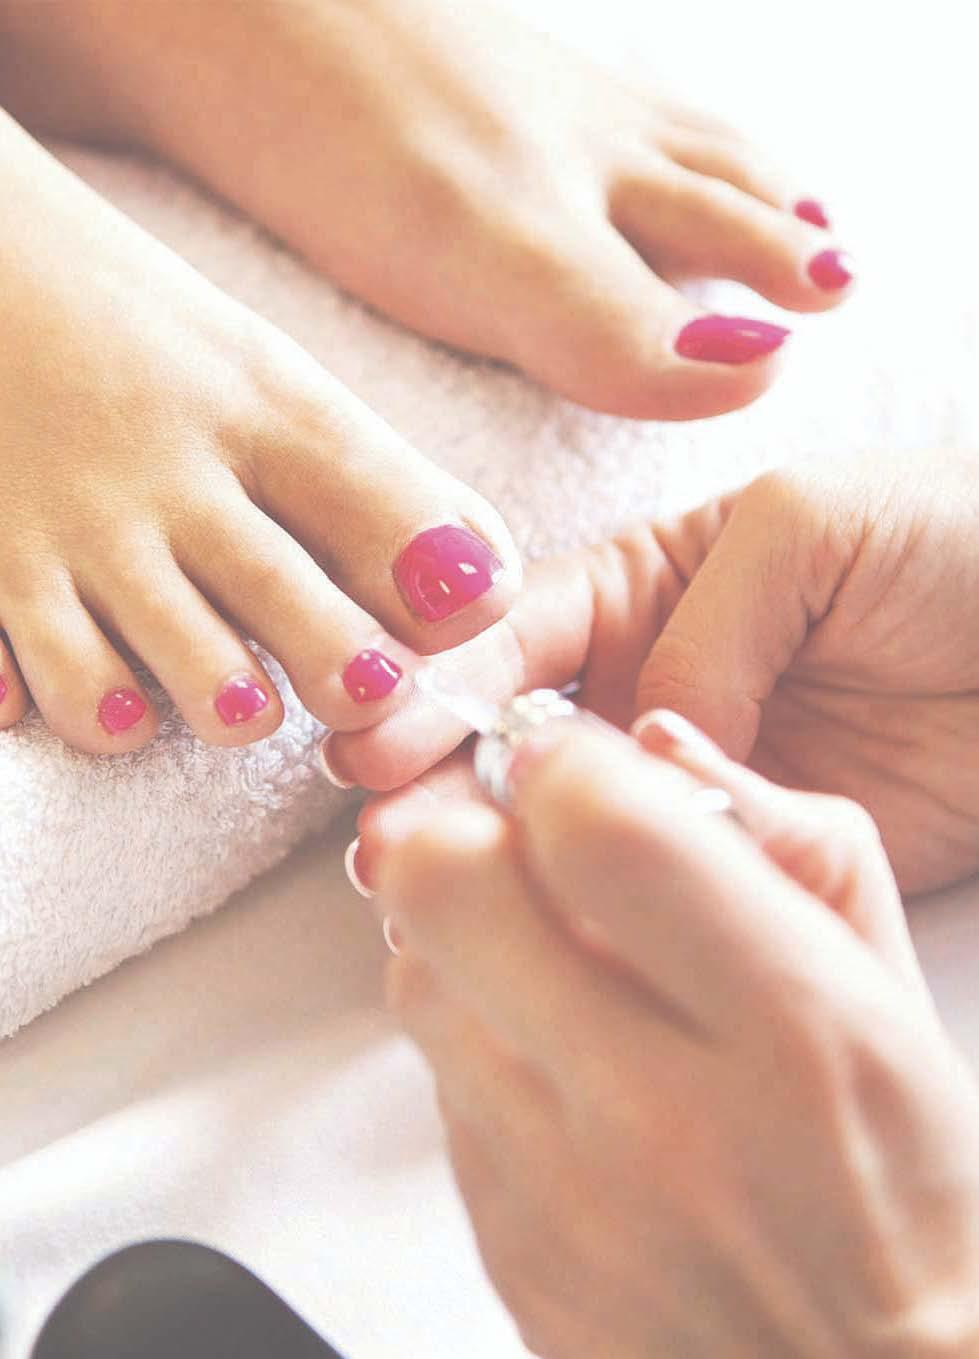 10 11 HANDS & FEET SPA PEDICURES Pure luxury for beautiful feet and relaxation. Spa Pedicure Excellent foot and leg treatment.